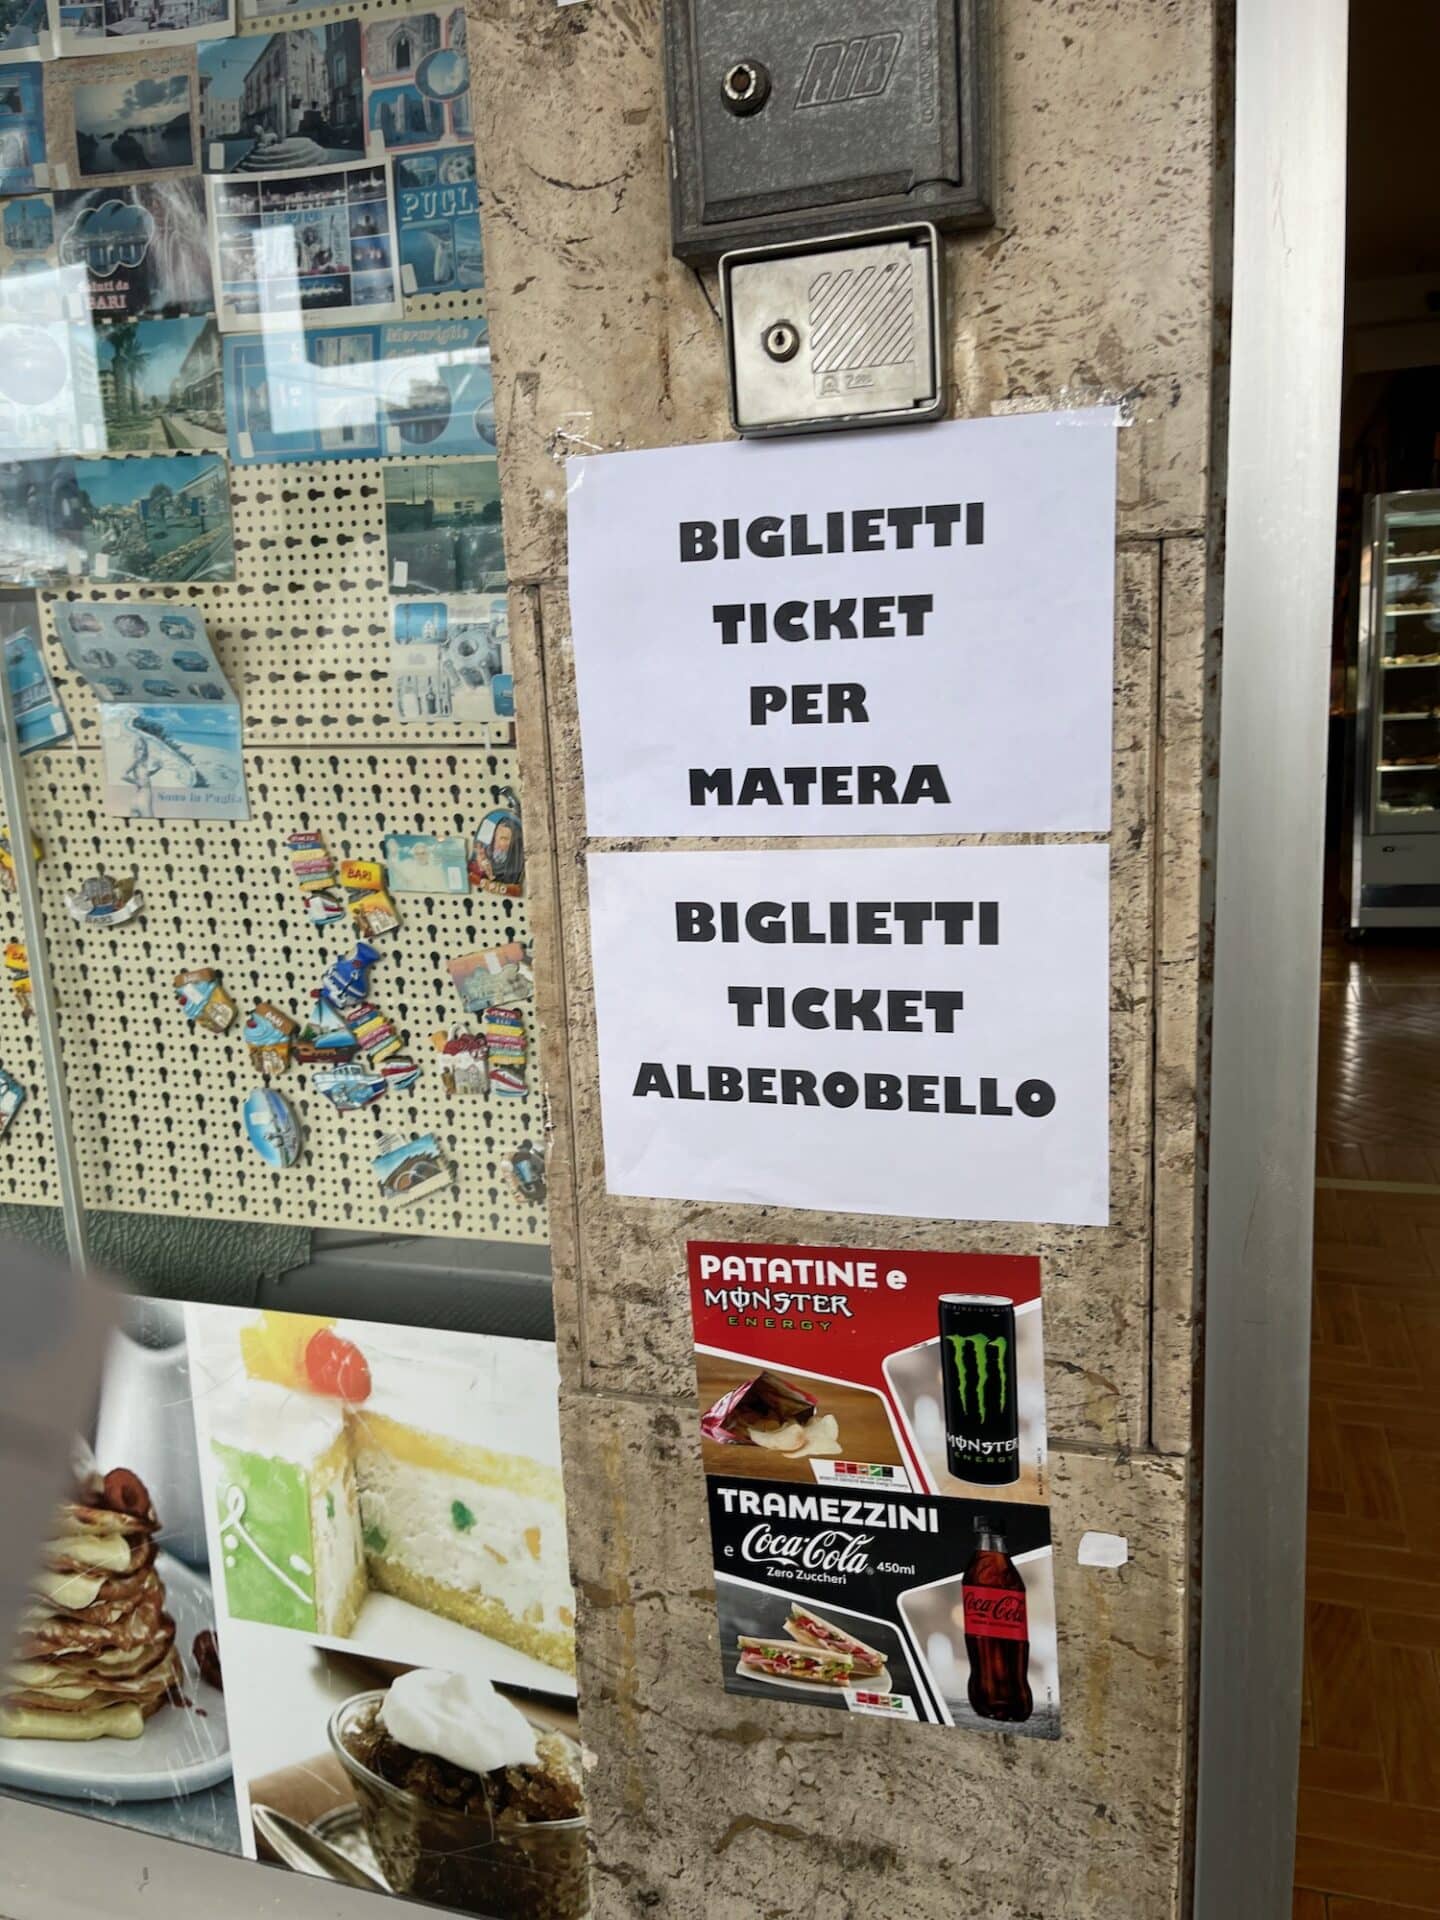 A sign on a wall in Bari, Italy, advertising tickets for Matera and Alberobello. The sign is written in both Italian and English. The wall also has postcards and advertisements for snacks and drinks.